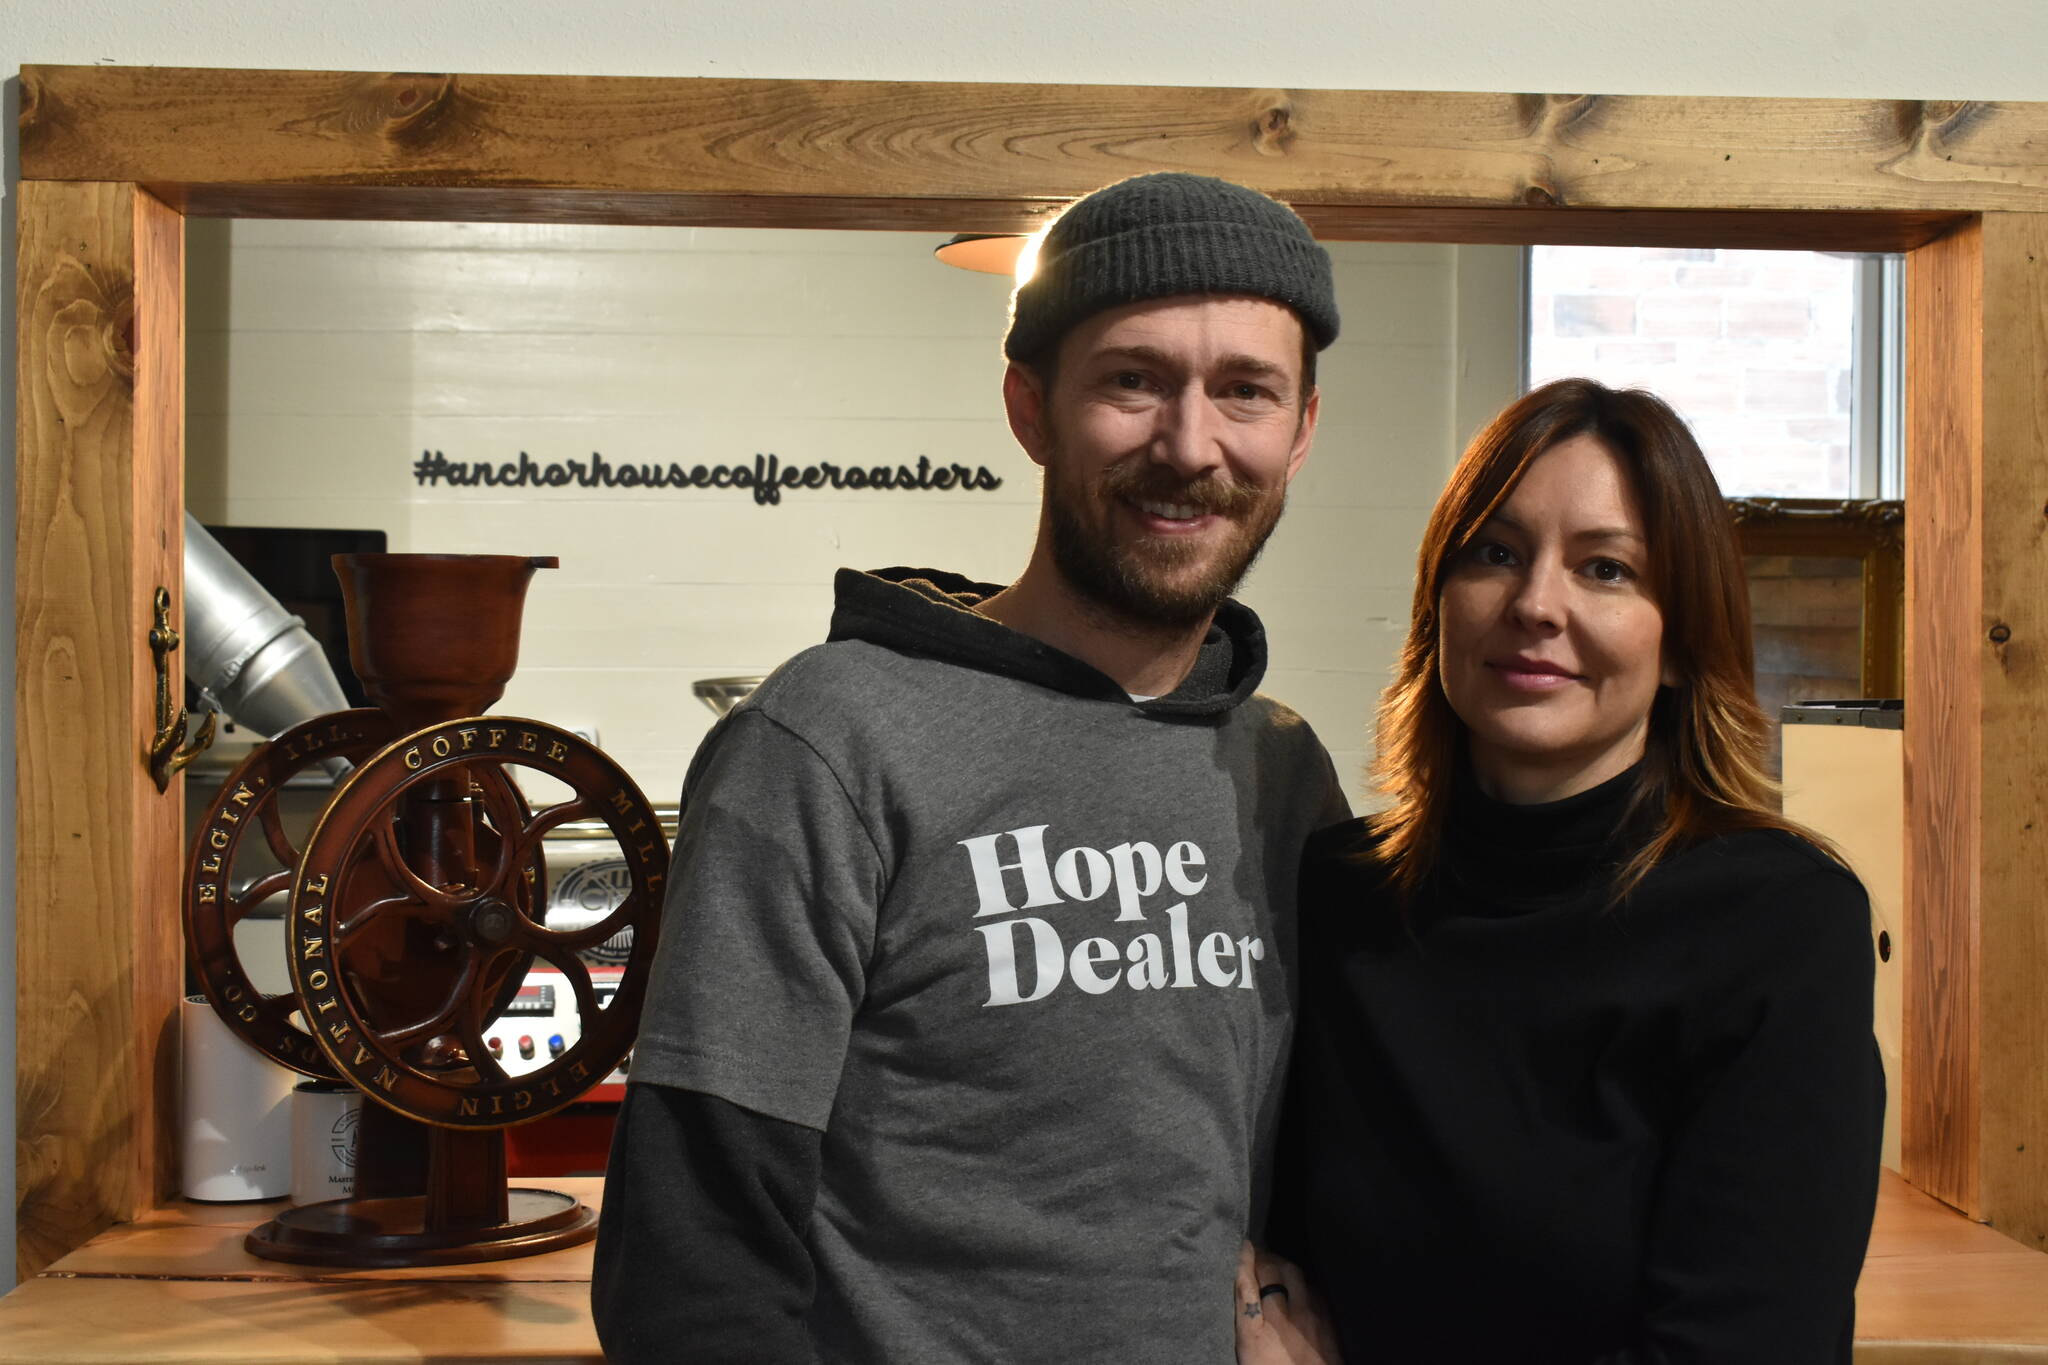 Luke and Tanya Wilbanks are the owners of Anchor House Coffee Roasters, a cafe that opened recently in the heart of Buckley’s downtown.